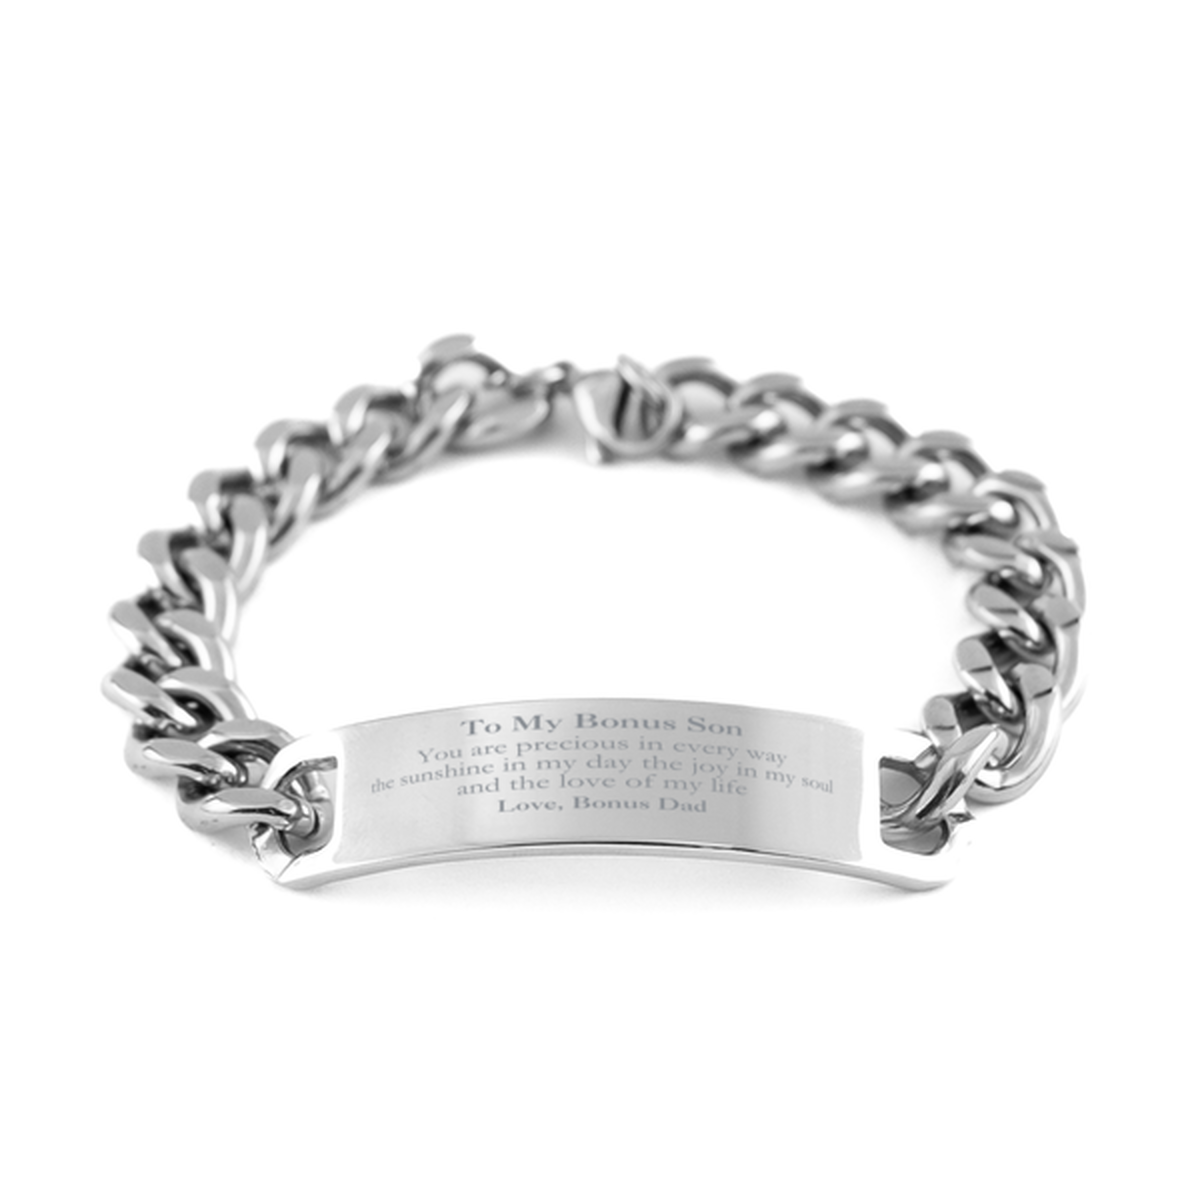 Graduation Gifts for Bonus Son Cuban Chain Stainless Steel Bracelet Present from Bonus Dad, Christmas Bonus Son Birthday Gifts Bonus Son You are precious in every way the sunshine in my day. Love, Bonus Dad